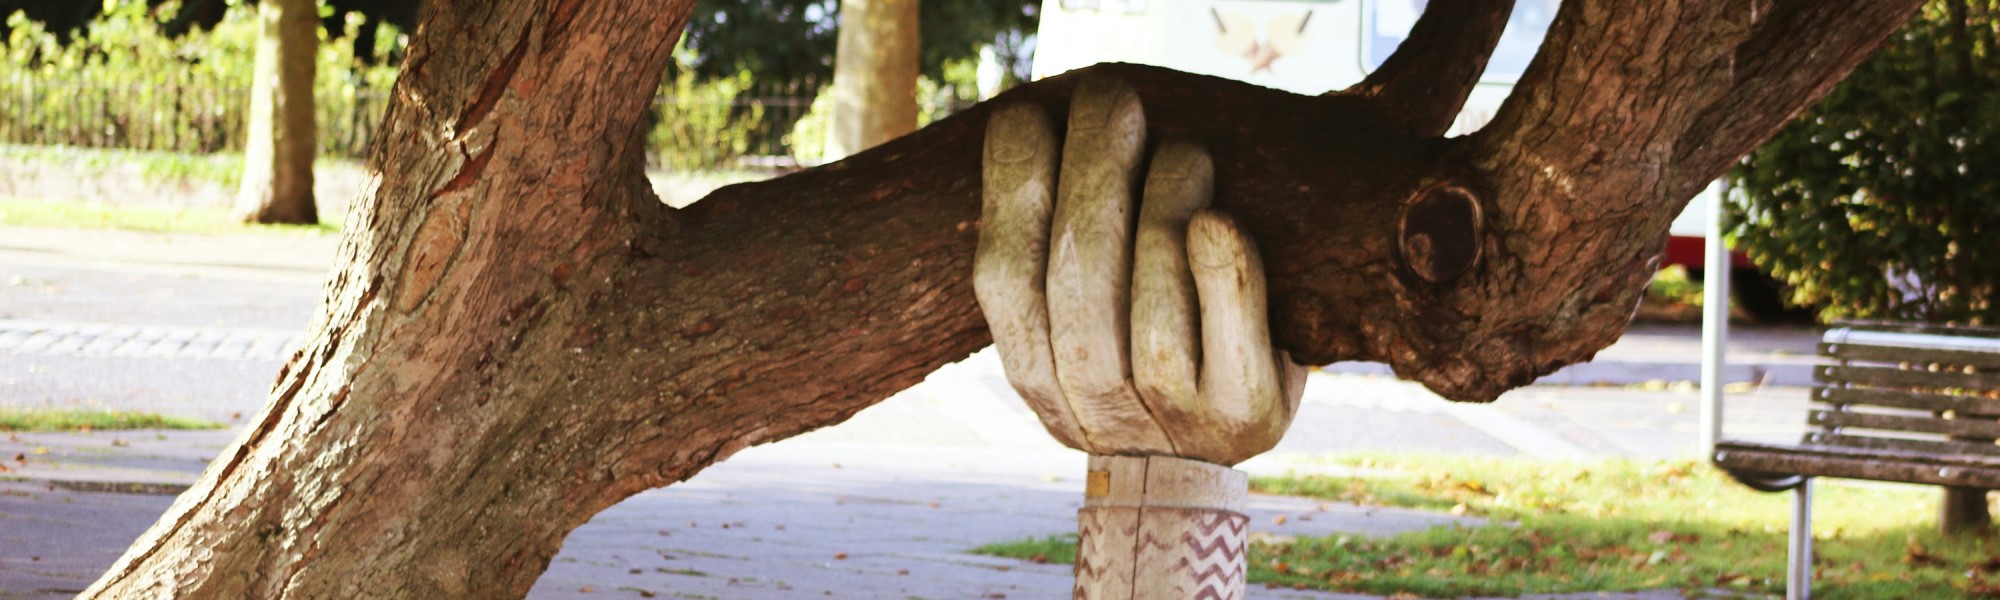 Large tree limb being supported by wooden carving of a hand